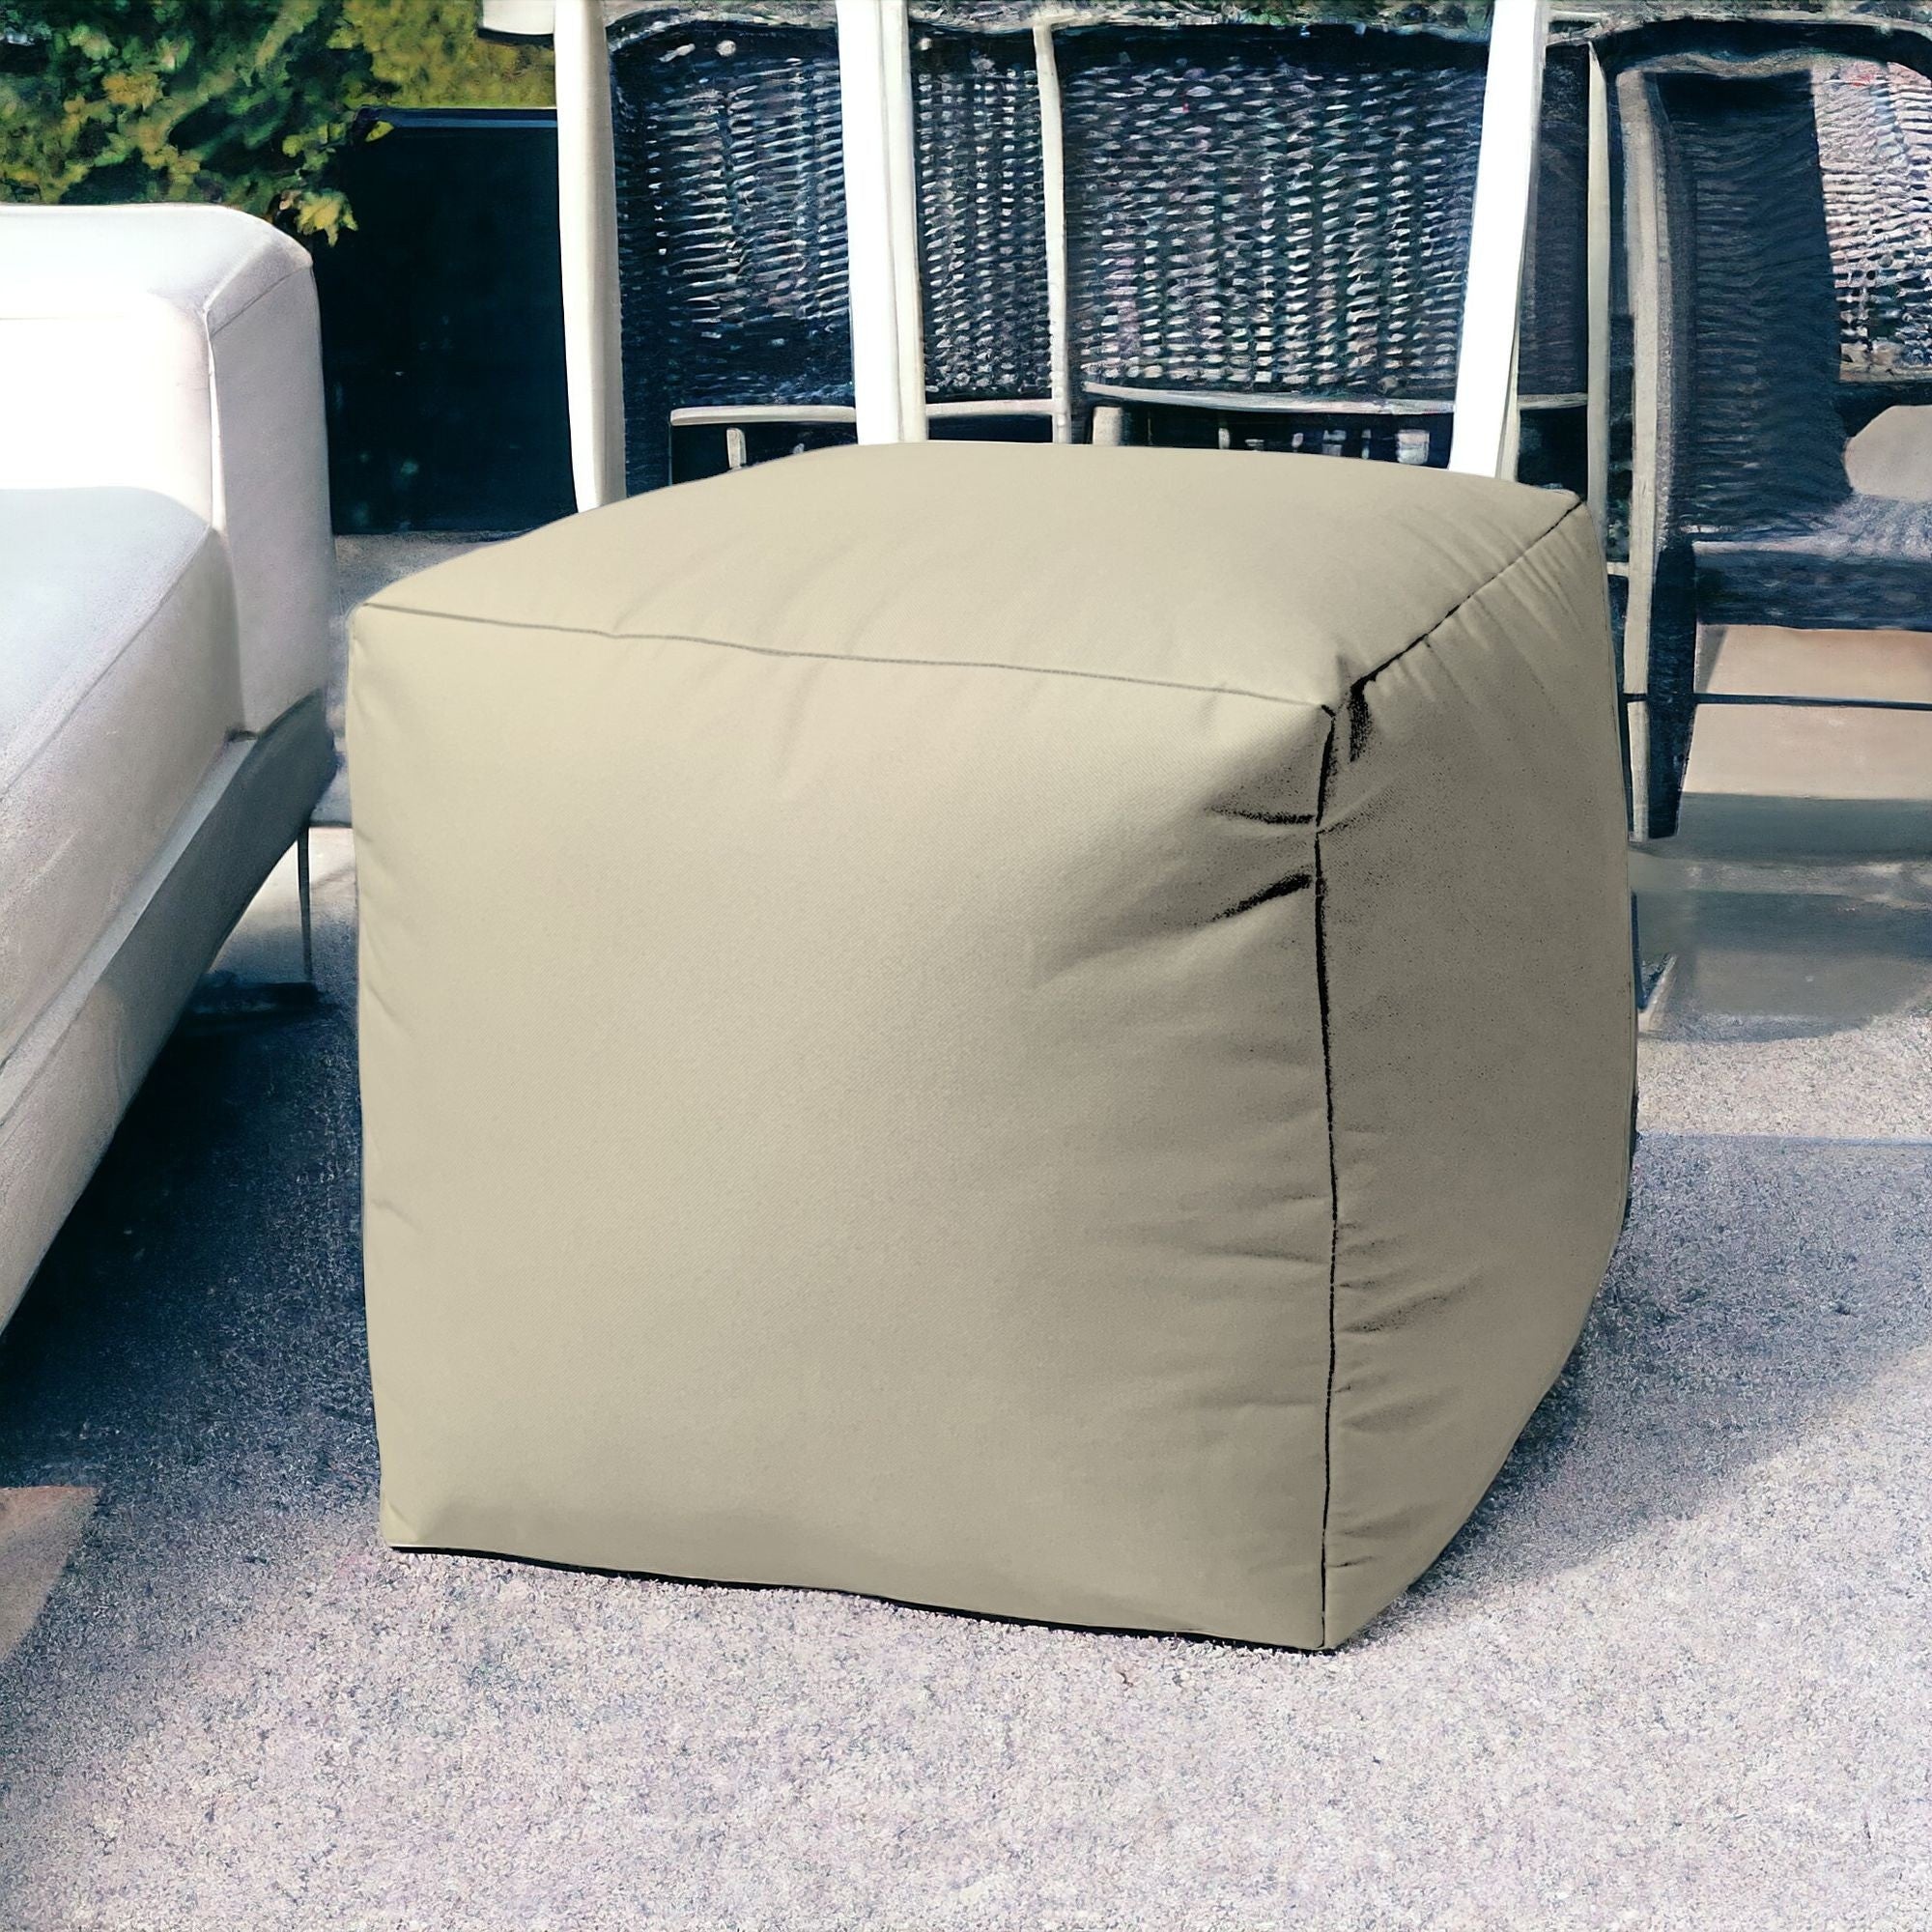 17" Cool Lemongrass Green Solid Color Indoor Outdoor Pouf Ottoman